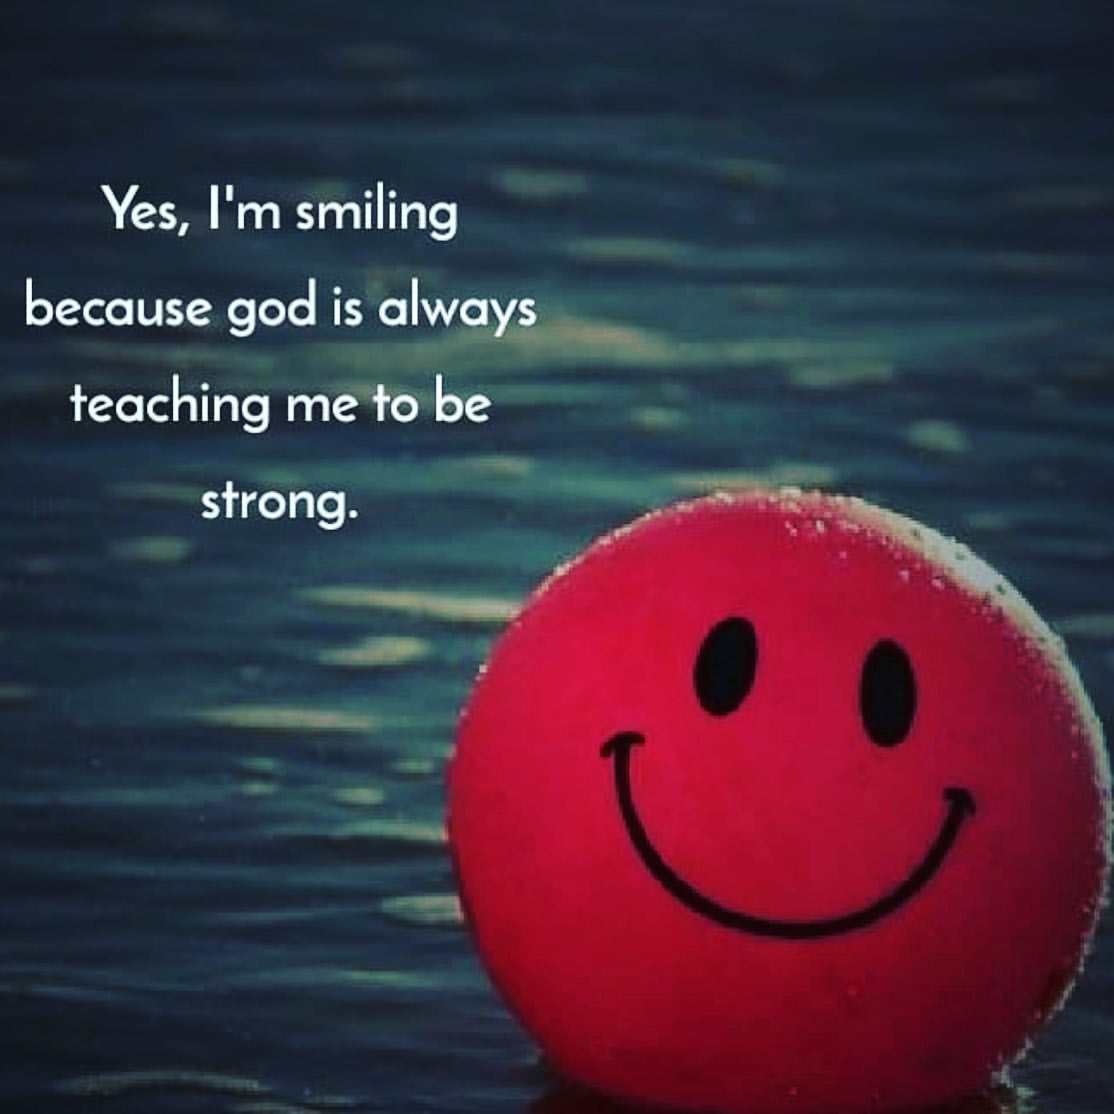 Yes, I'm smiling because god is always teaching me to be strong.